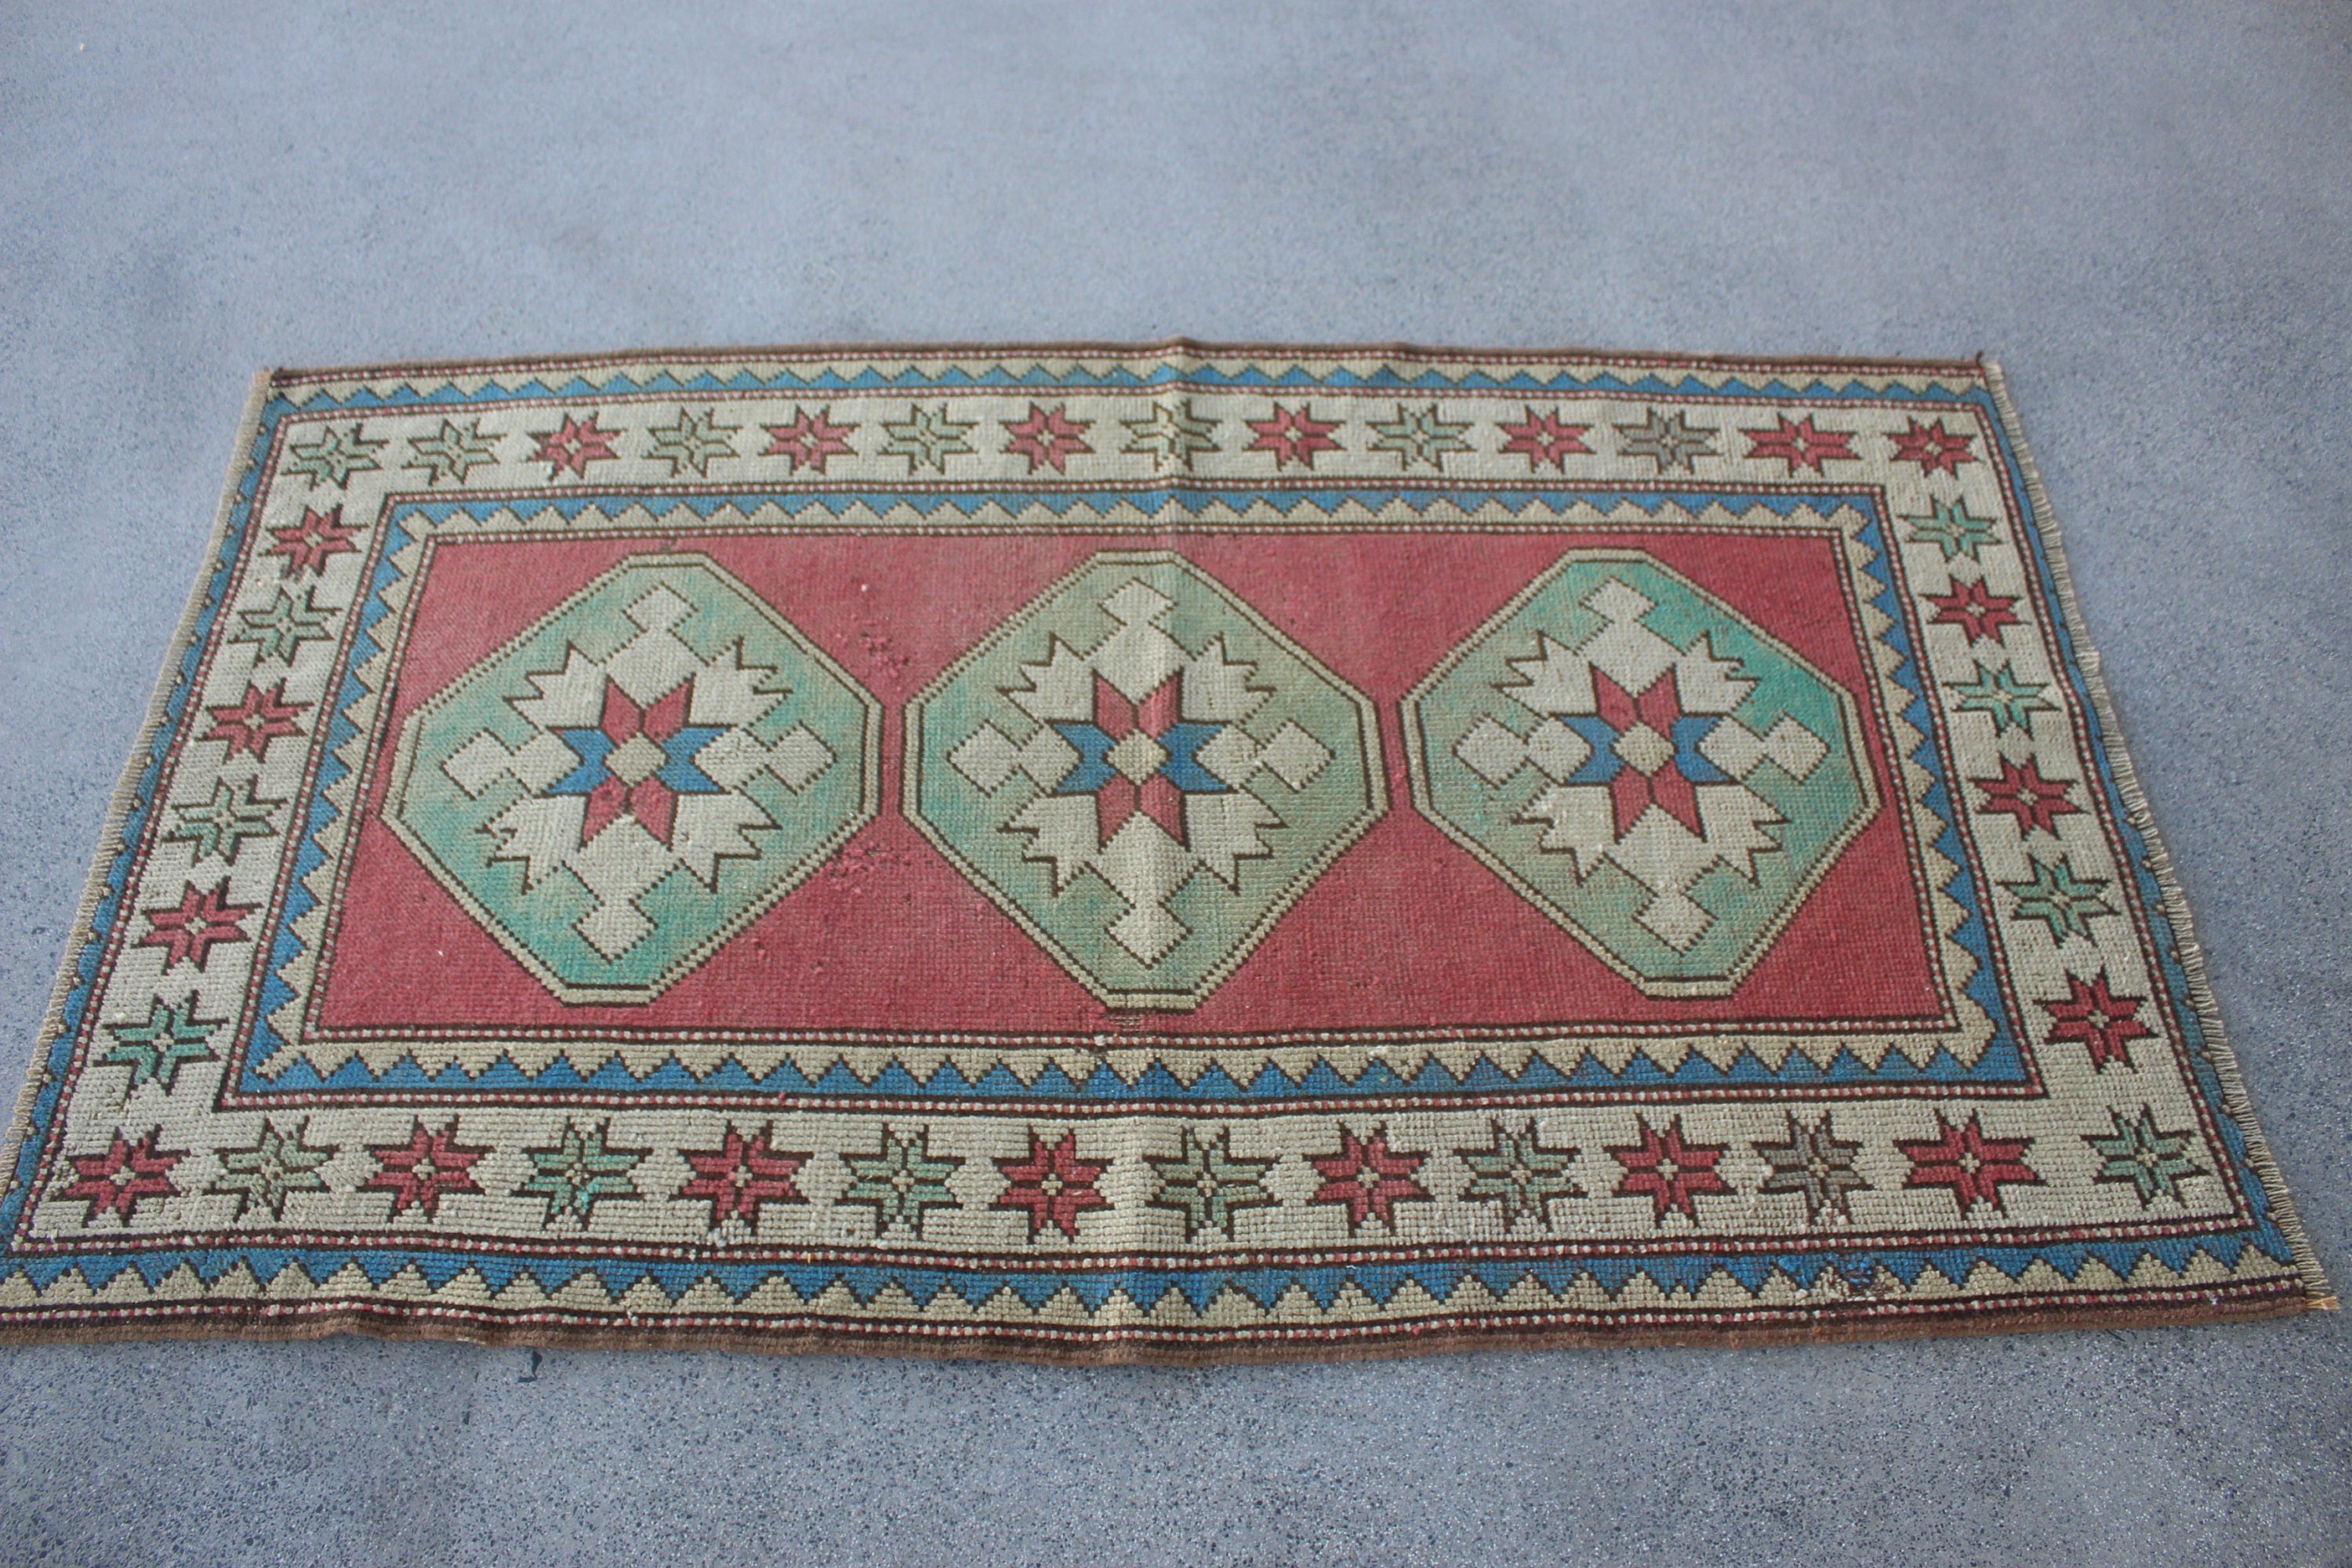 Pink Anatolian Rug, Rugs for Nursery, Entry Rug, Turkish Rugs, Handwoven Rug, 3.1x5.3 ft Accent Rug, Vintage Rugs, Oushak Rug, Kitchen Rug